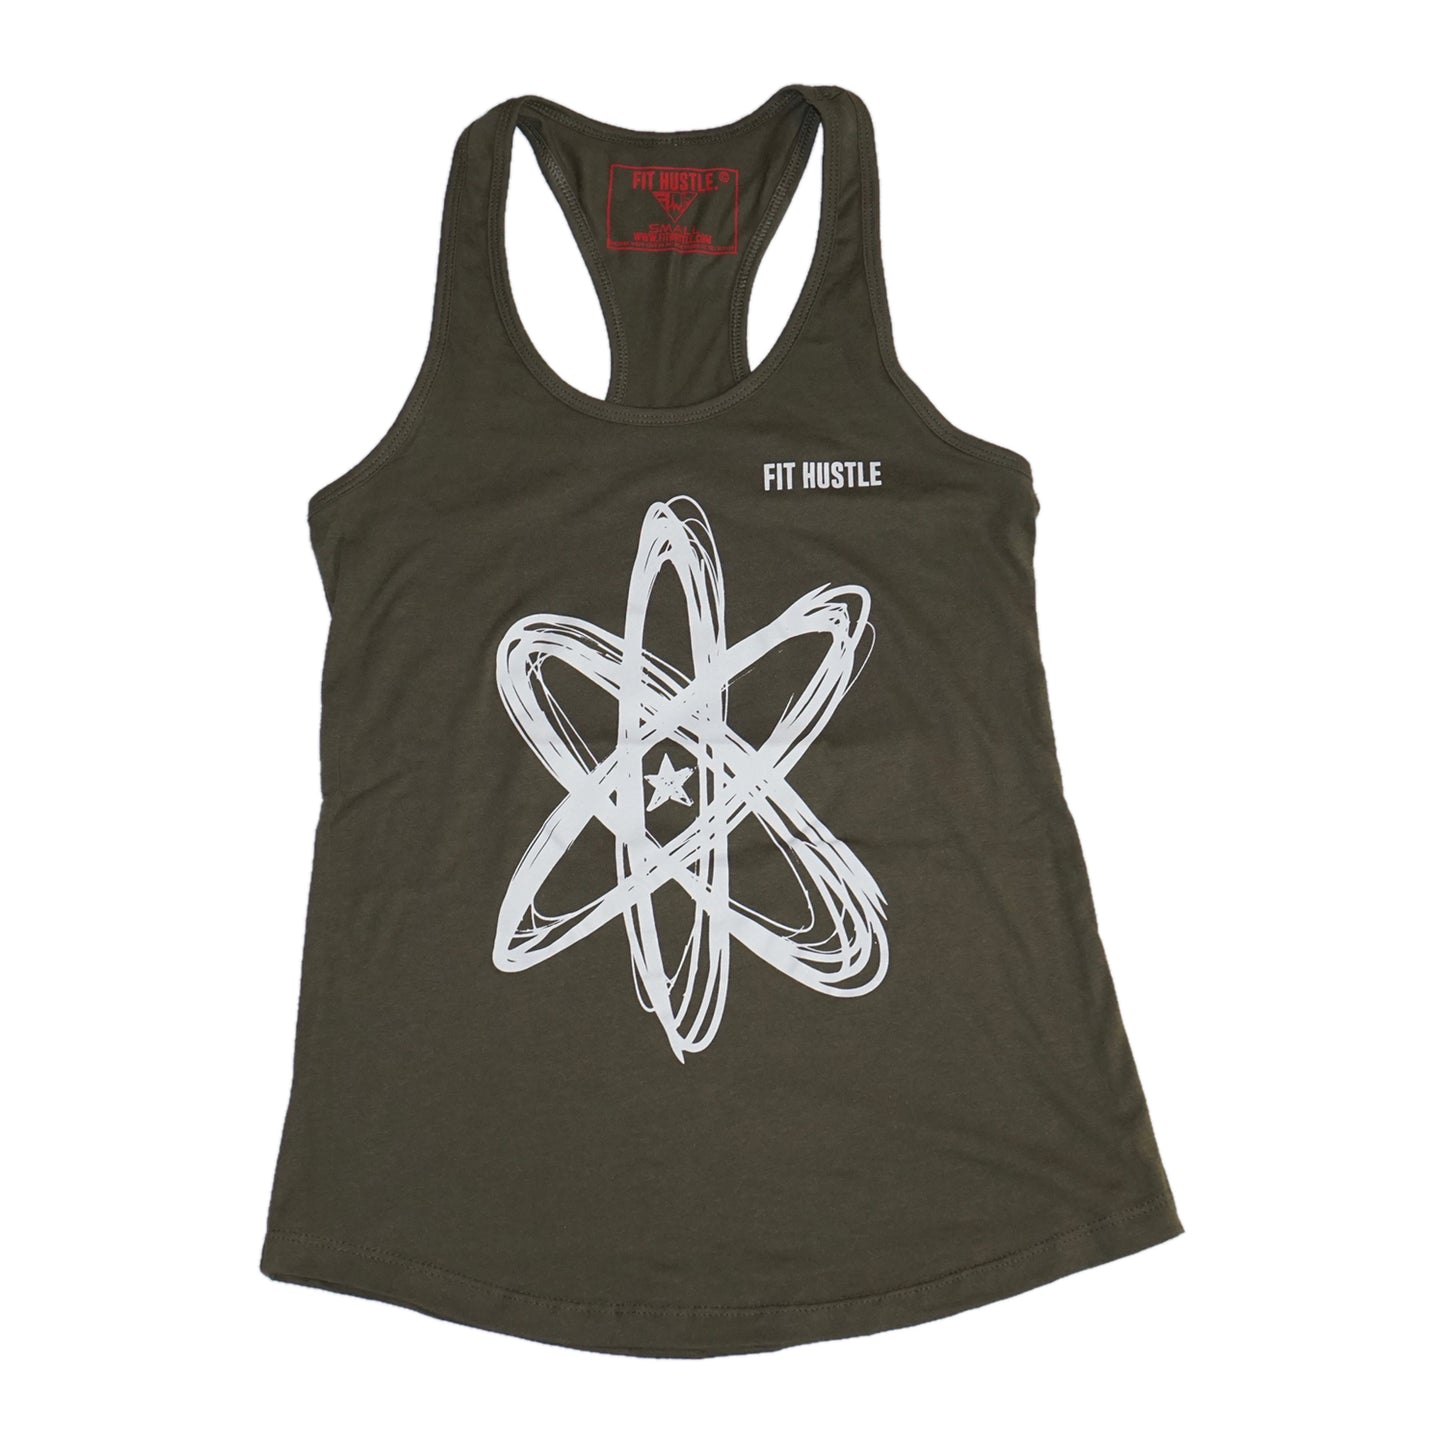 Women's Military Racerback: "Workout the Doubt" - Lil Monstar Edition